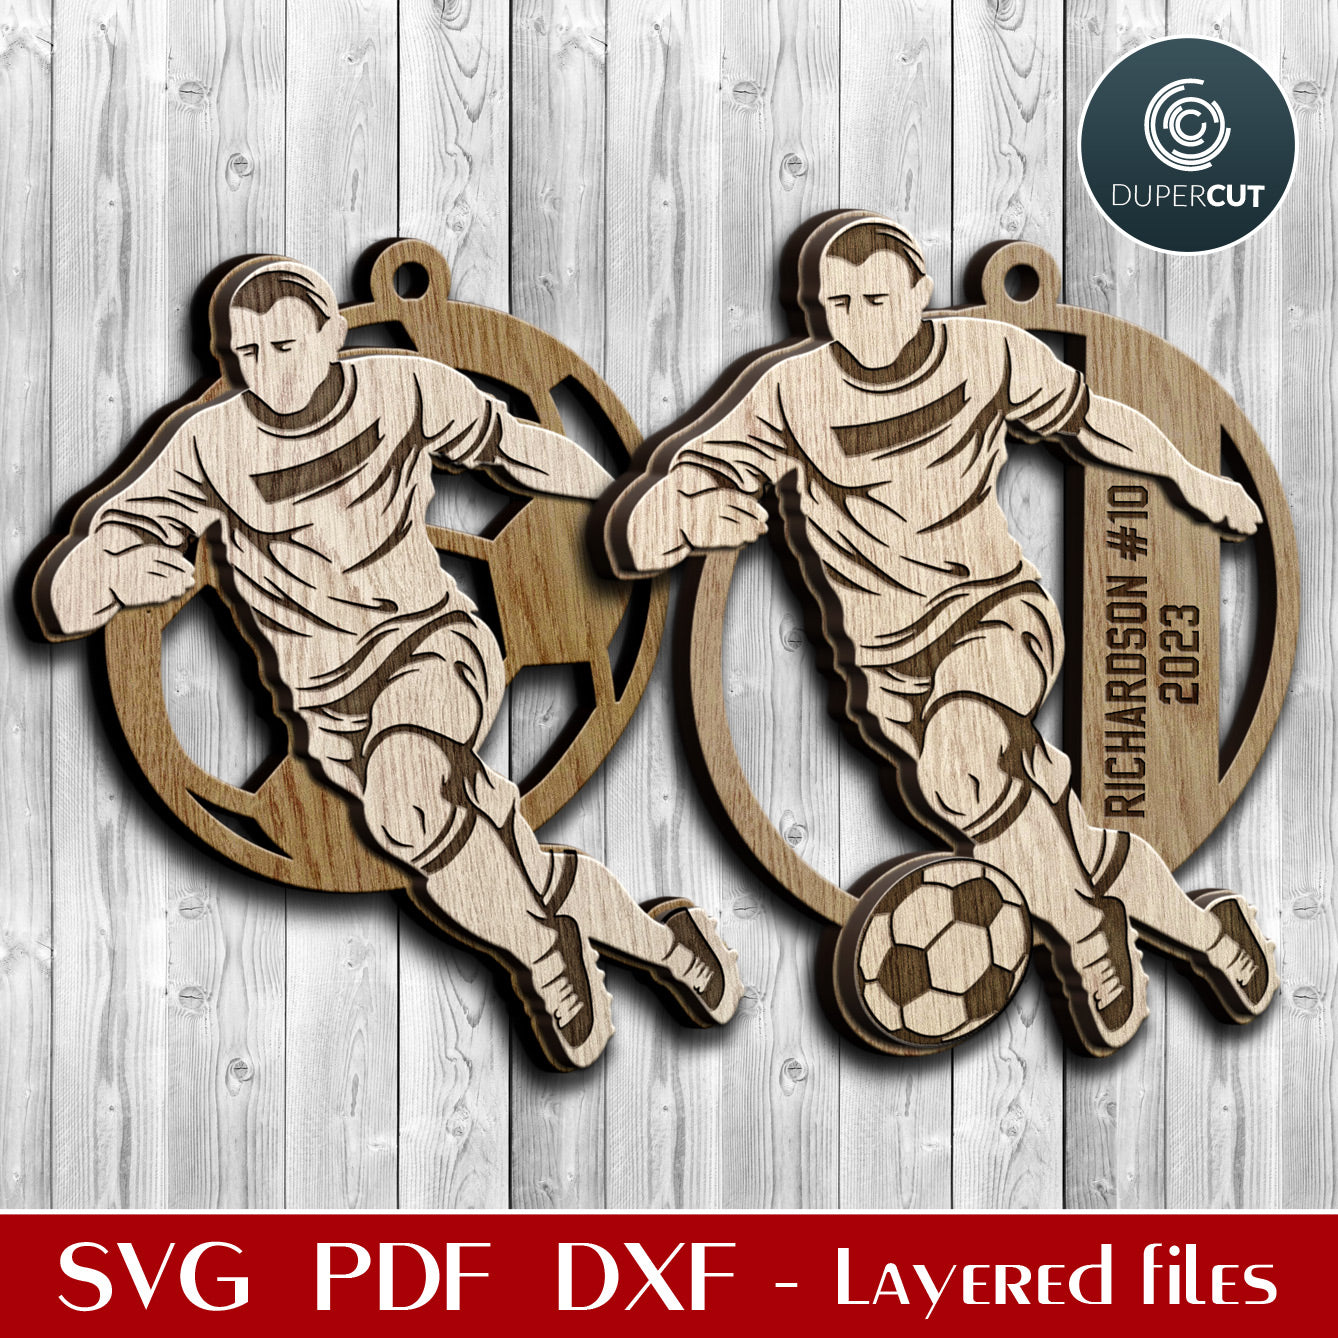 Soccer / football player sports Christmas ornament, SVG layered file template for laser machines Glowforge, Cricut, X-tool, CNC plasma by www.DuperCut.com